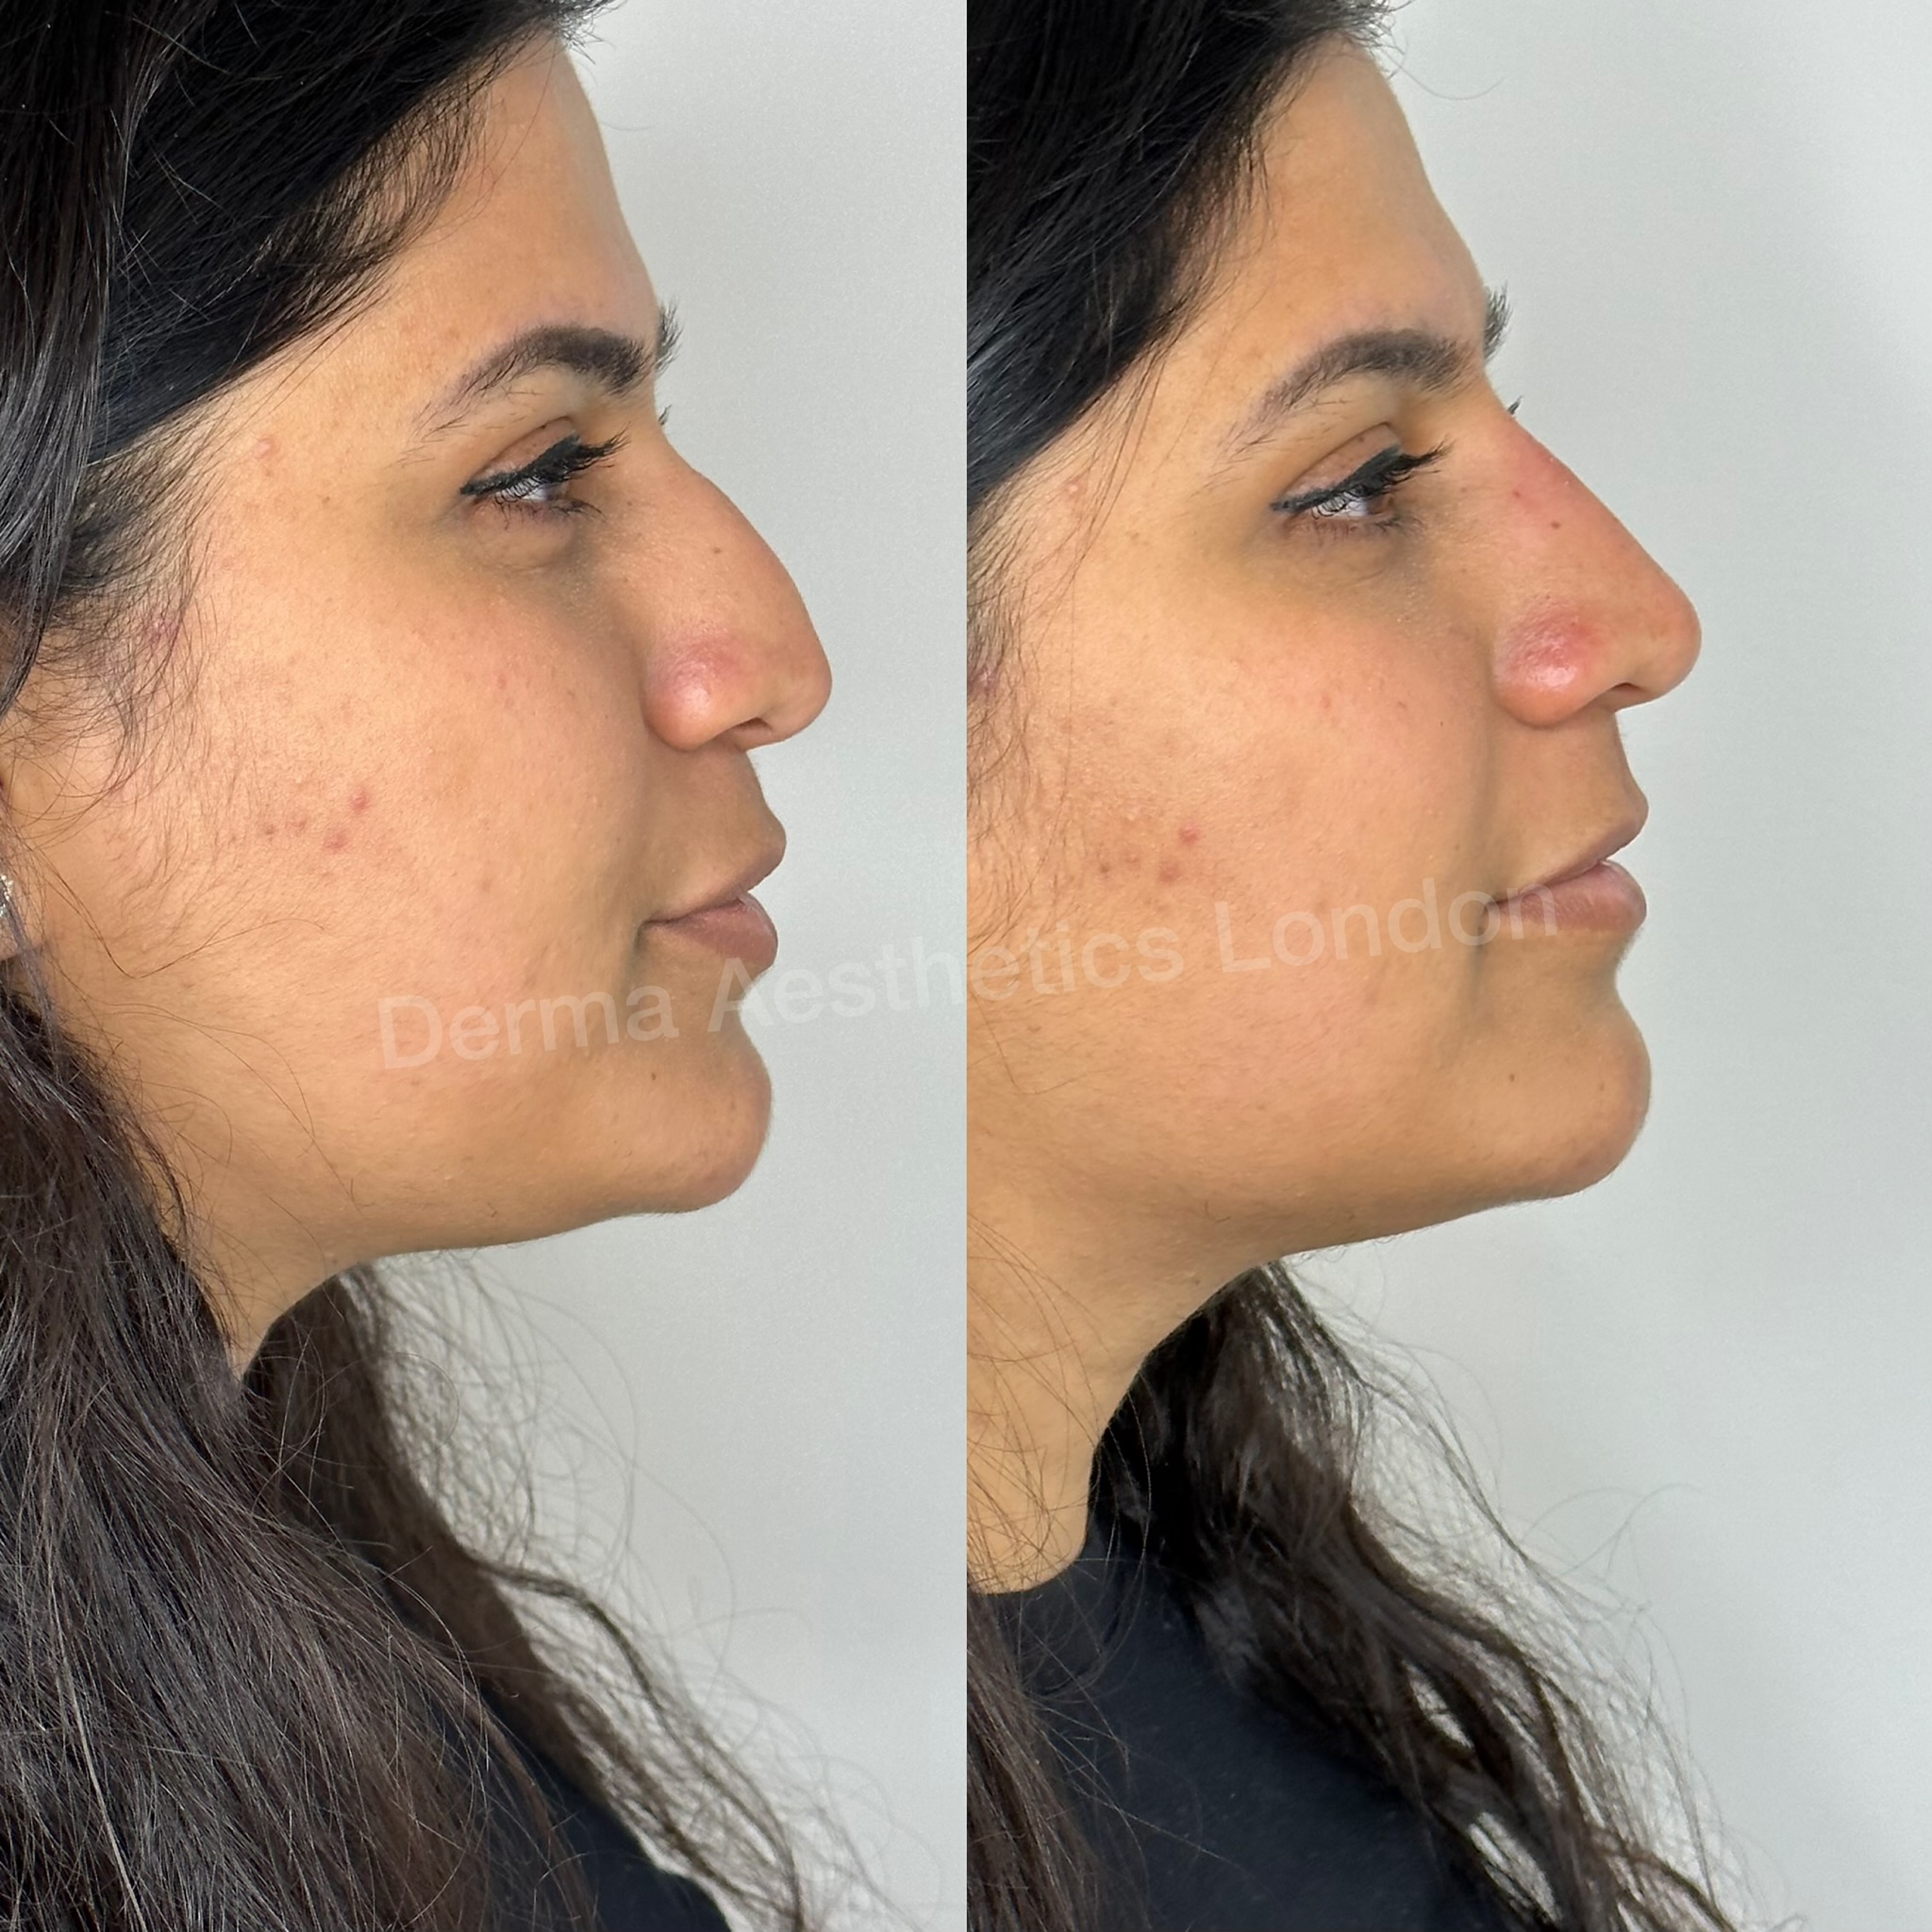 Before and After Non-Surgical Rhinoplasty